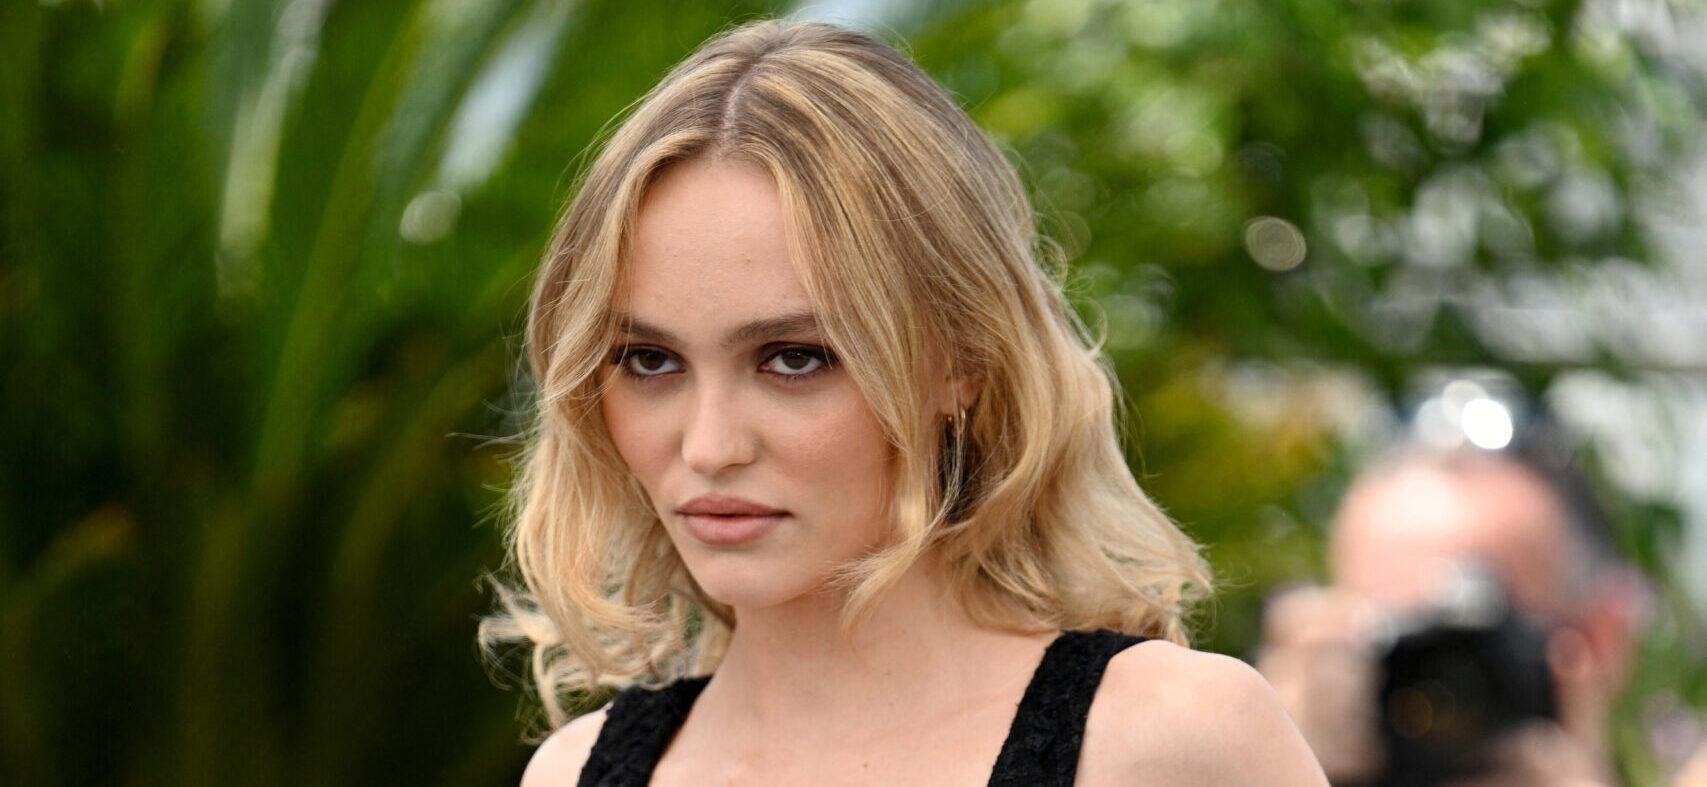 Lily-Rose Depp Shares Sultry Photos To Mark The End Of Her ‘Wildest’ Journey On ‘The Idol’